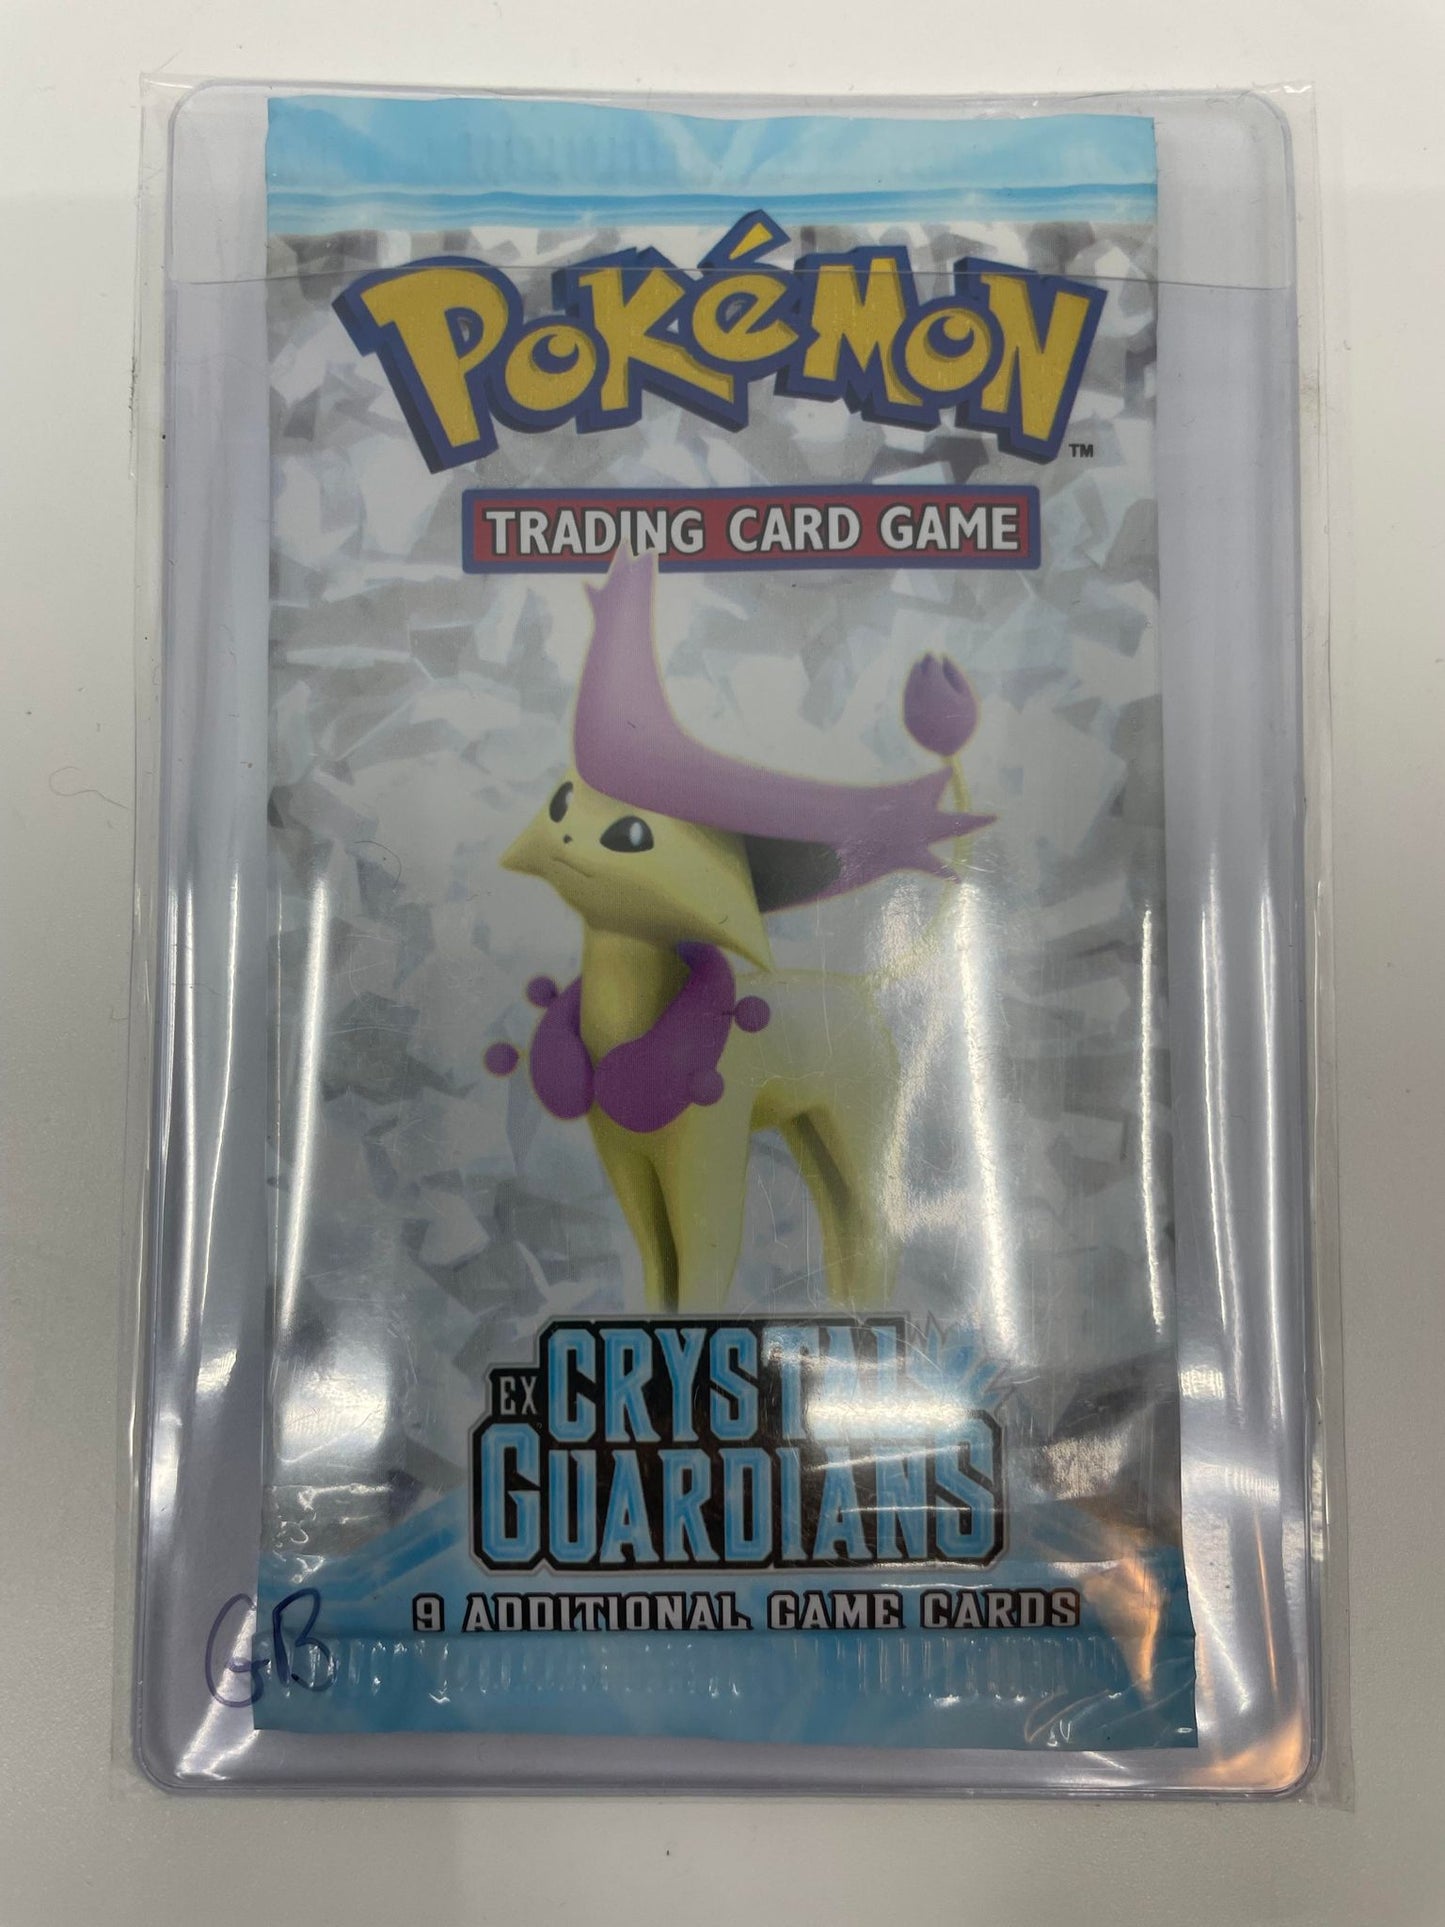 Pokemon EX Crystal Guardians Booster Pack